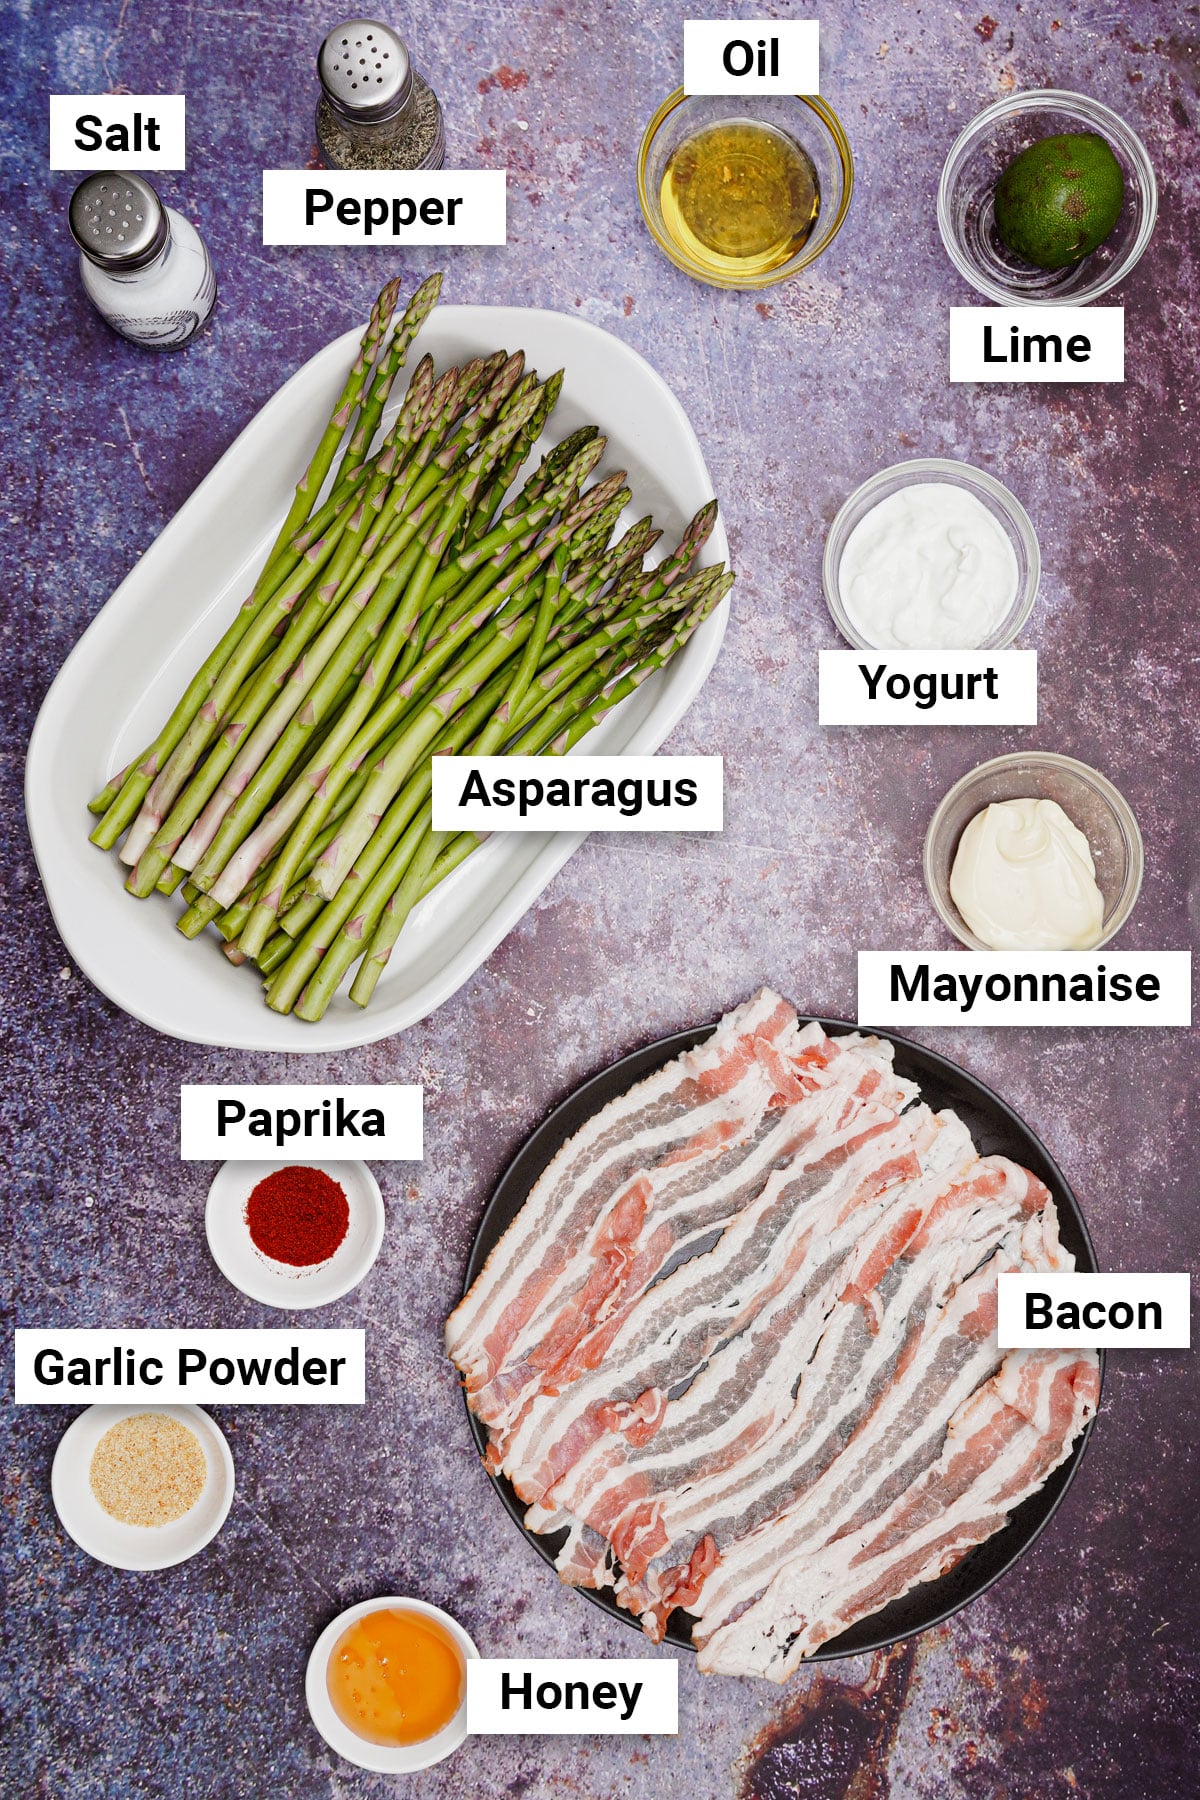 Ingredients for bacon-wrapped asparagus recipe with yogurt dipping sauce.